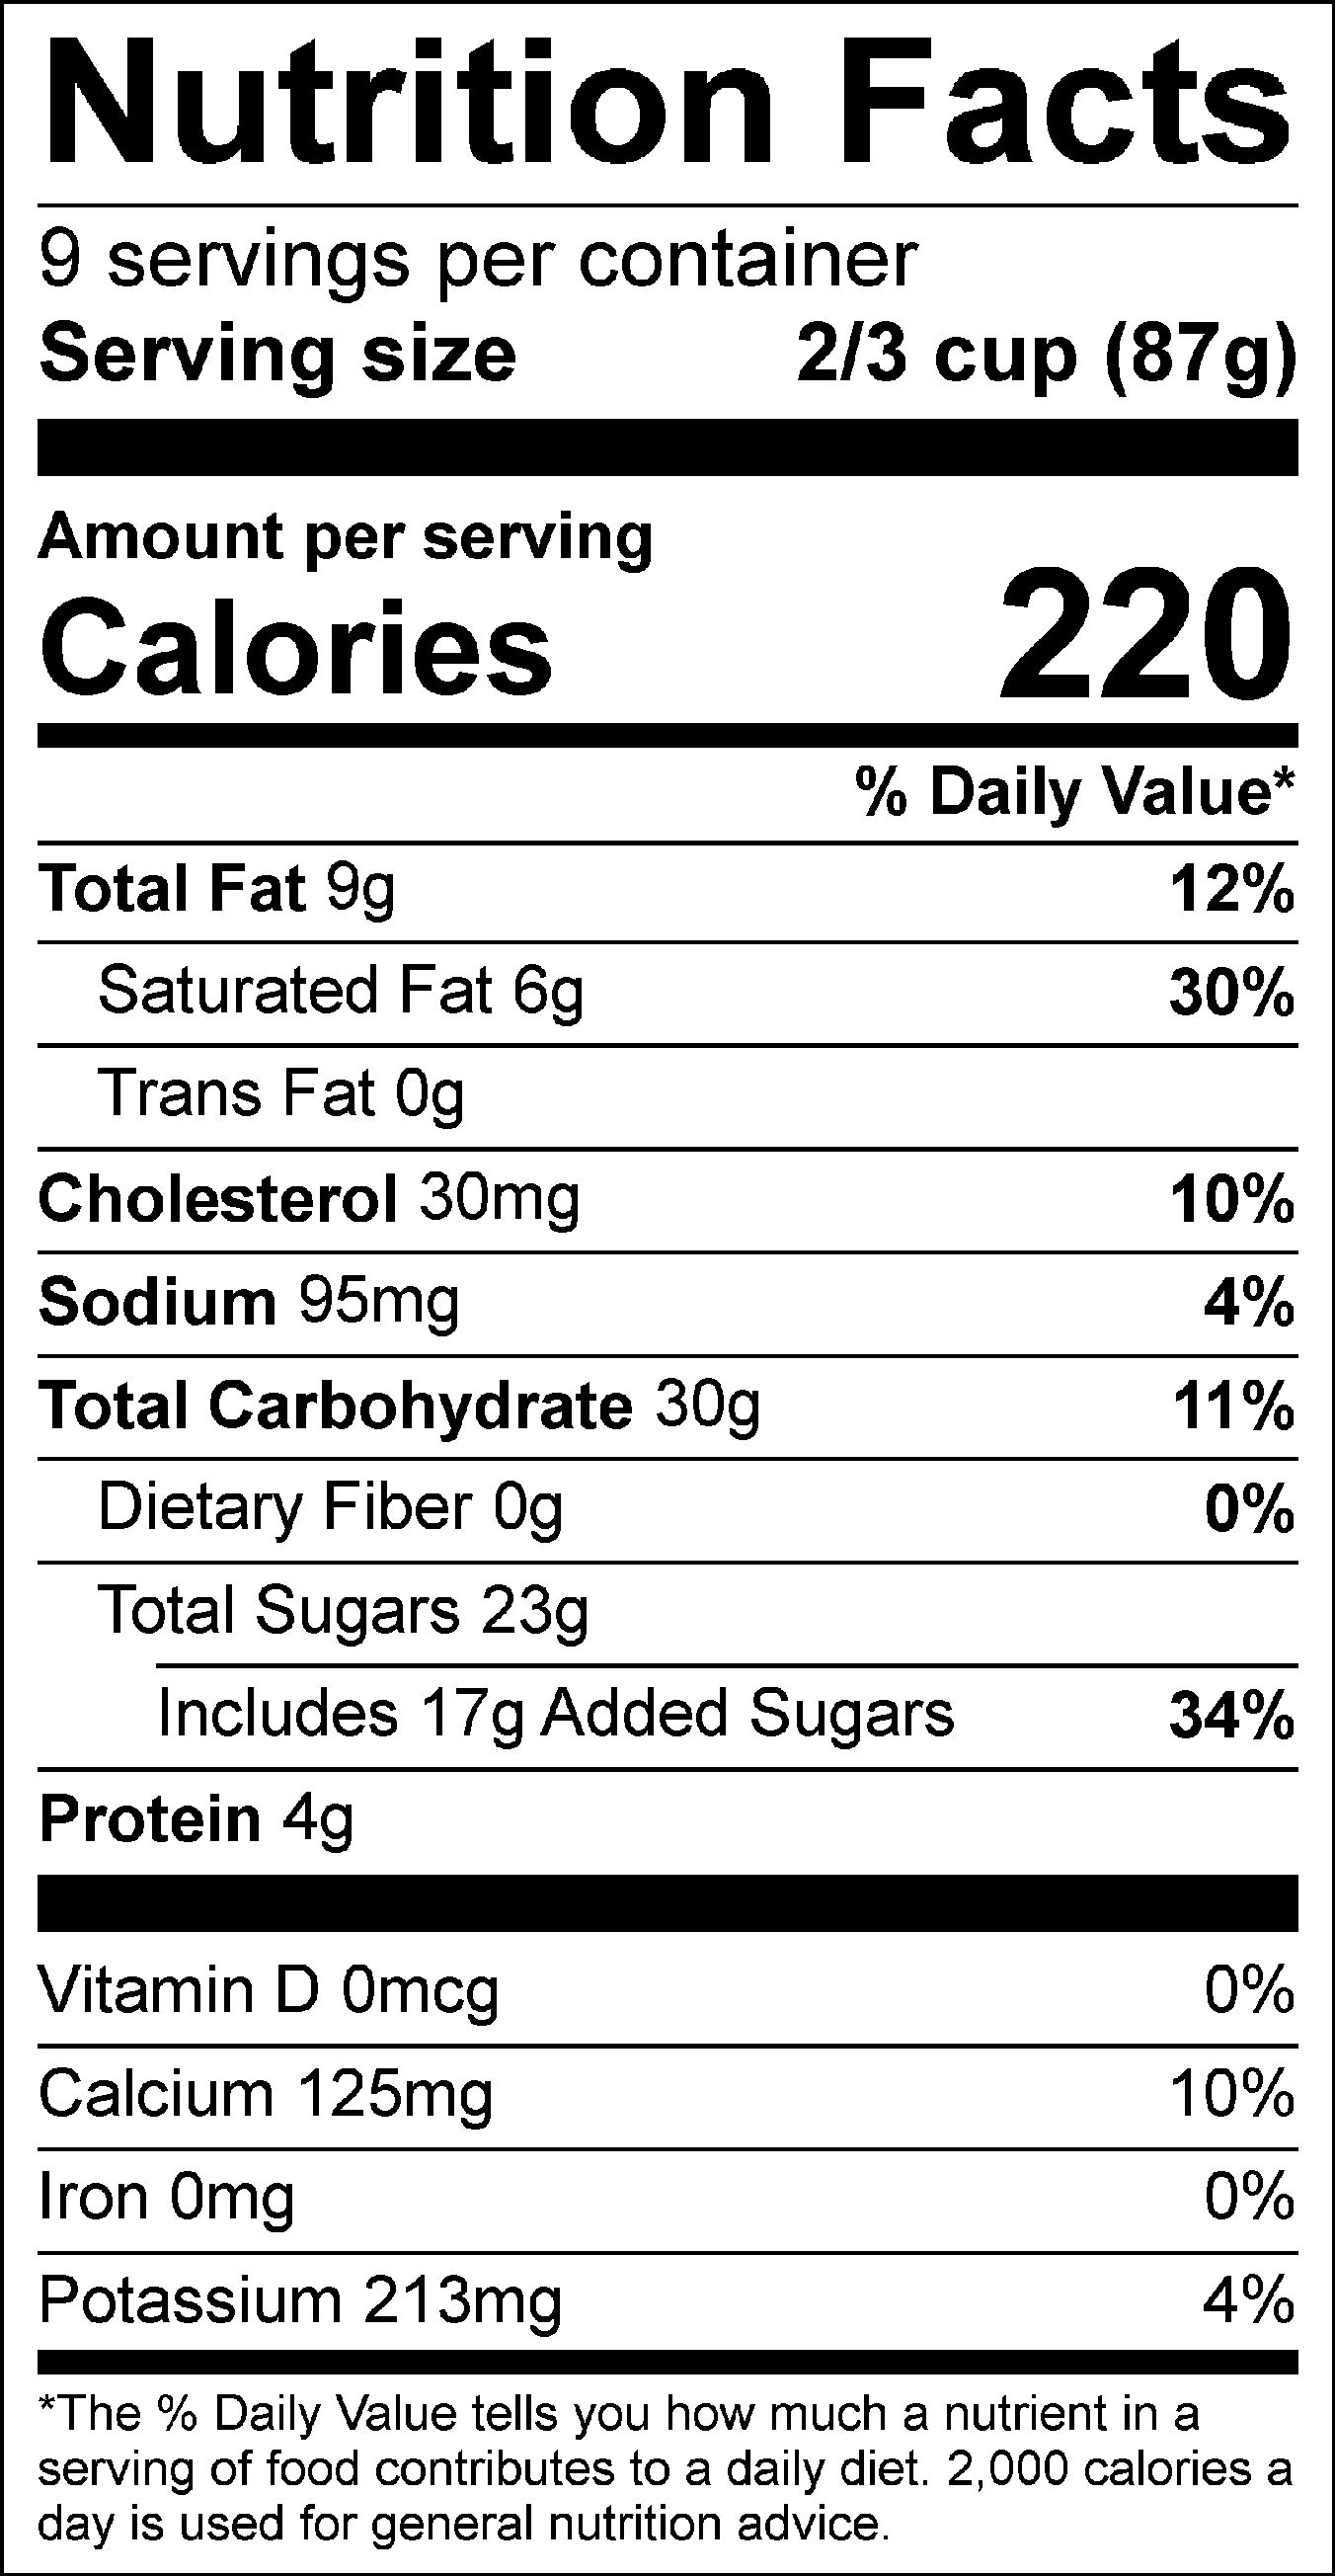 nutritional image